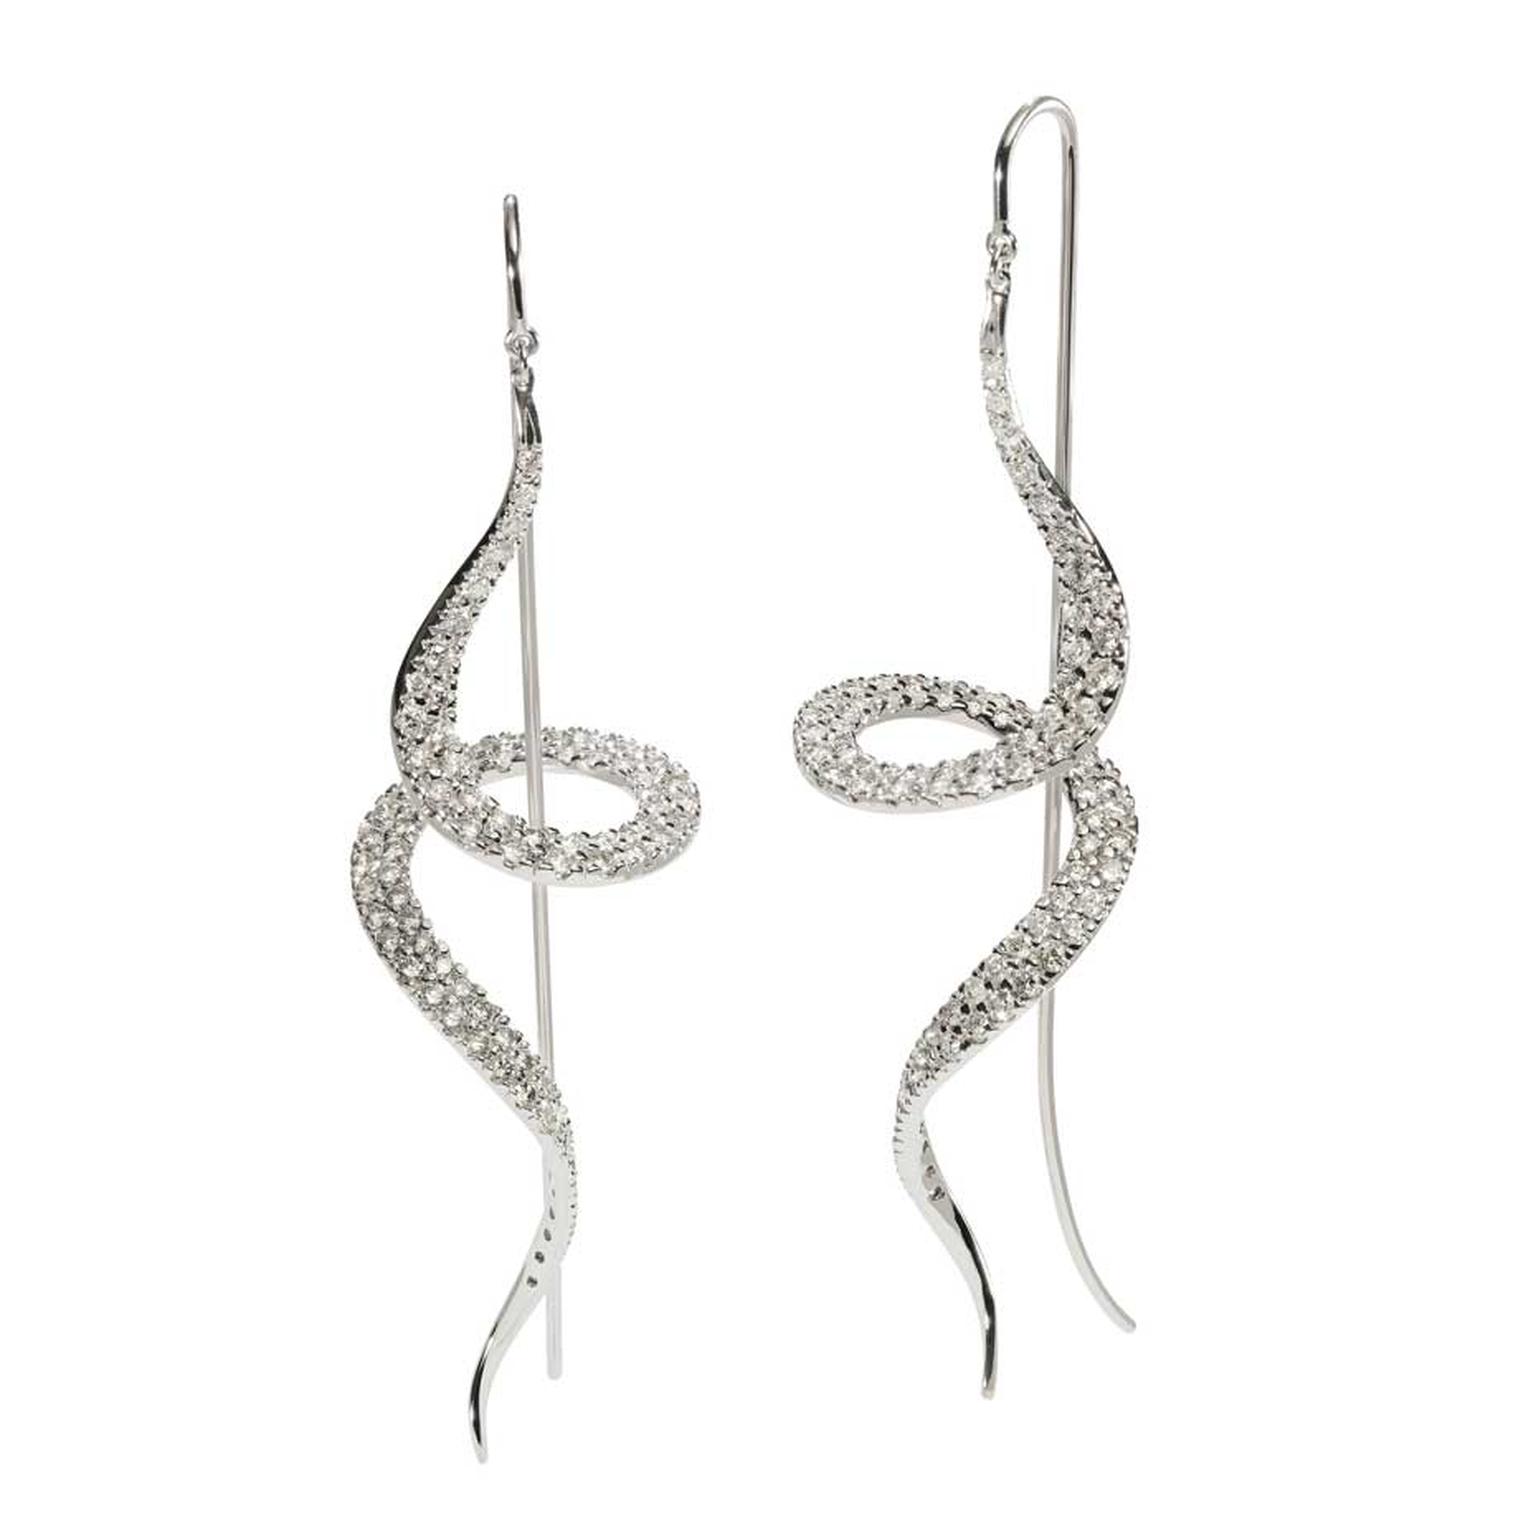 H.Stern's 2014 Oscar Niemeyer collection white gold and diamond earrings display the elegant lines and curves Oscar Niemeyer was so well known for.